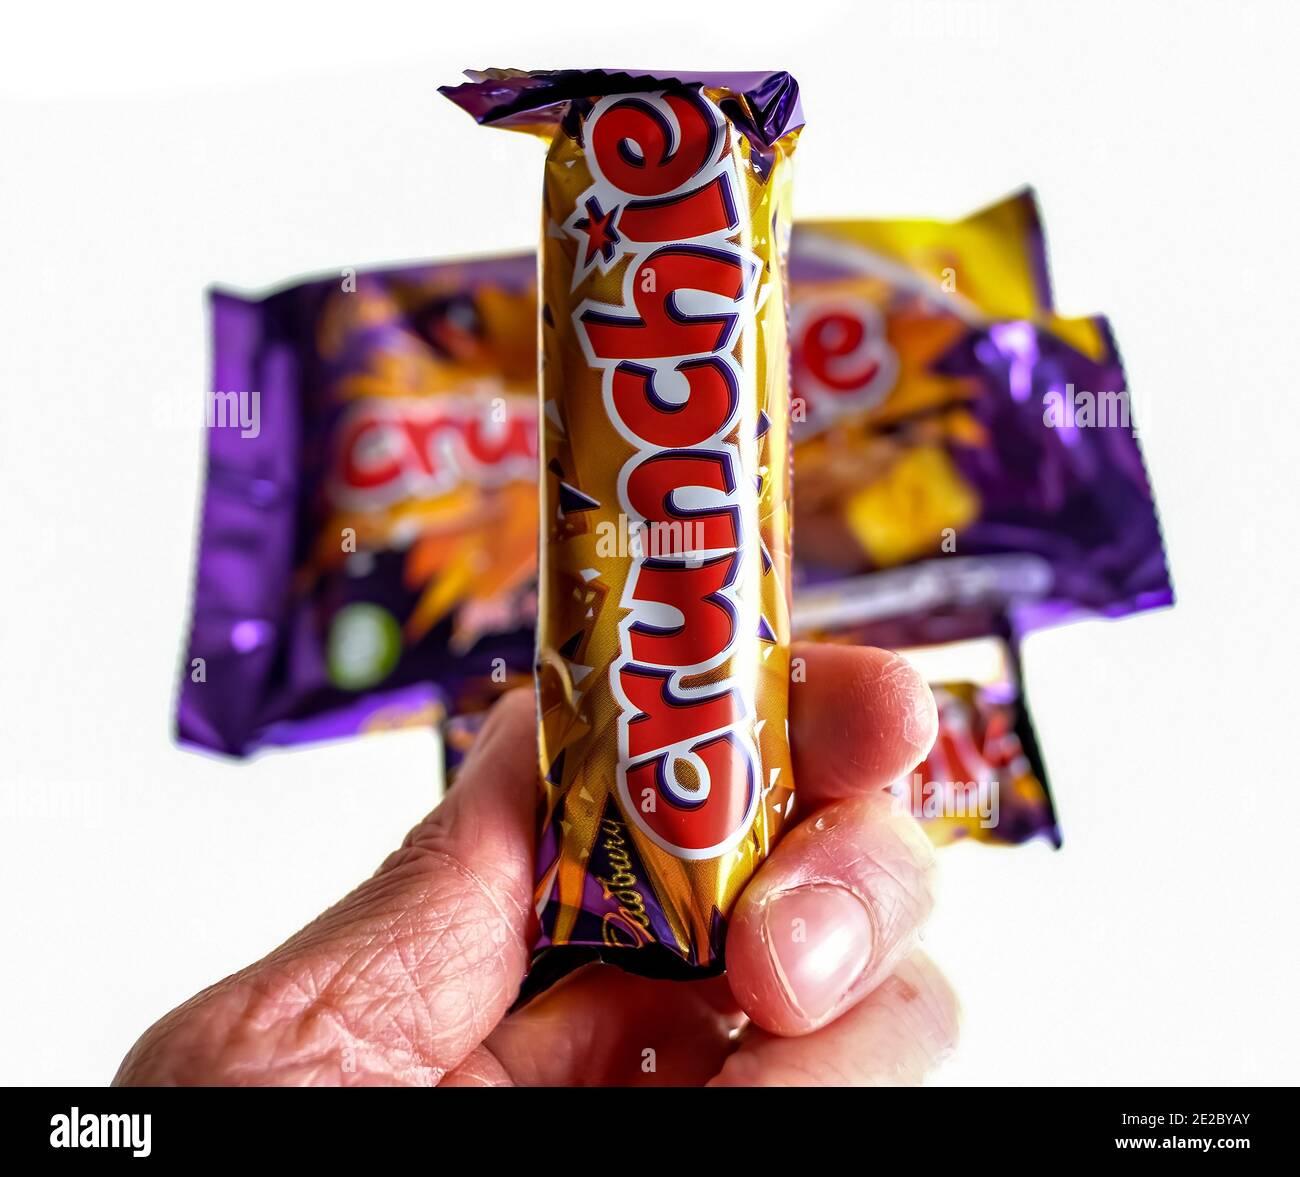 Norwich, Norfolk, UK – December 24 2020. An illustrative editorial photo of an unidentifiable human holding a Cadbury Crunchie chocolate bar Stock Photo